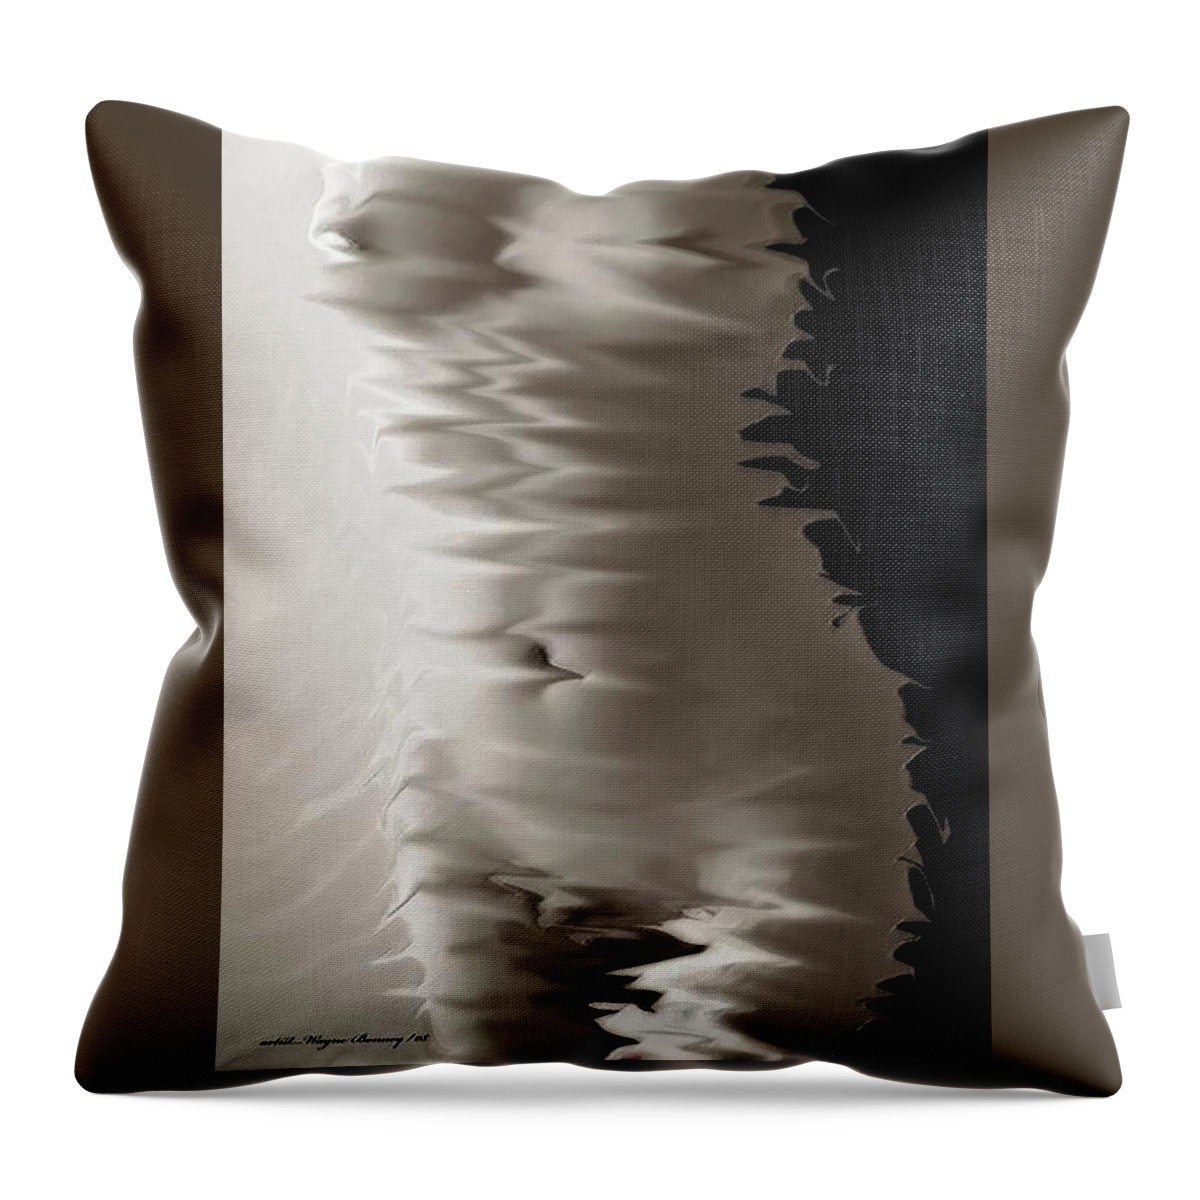 Female Nude Model Throw Pillow featuring the digital art Invasion of Privacy by Wayne Bonney